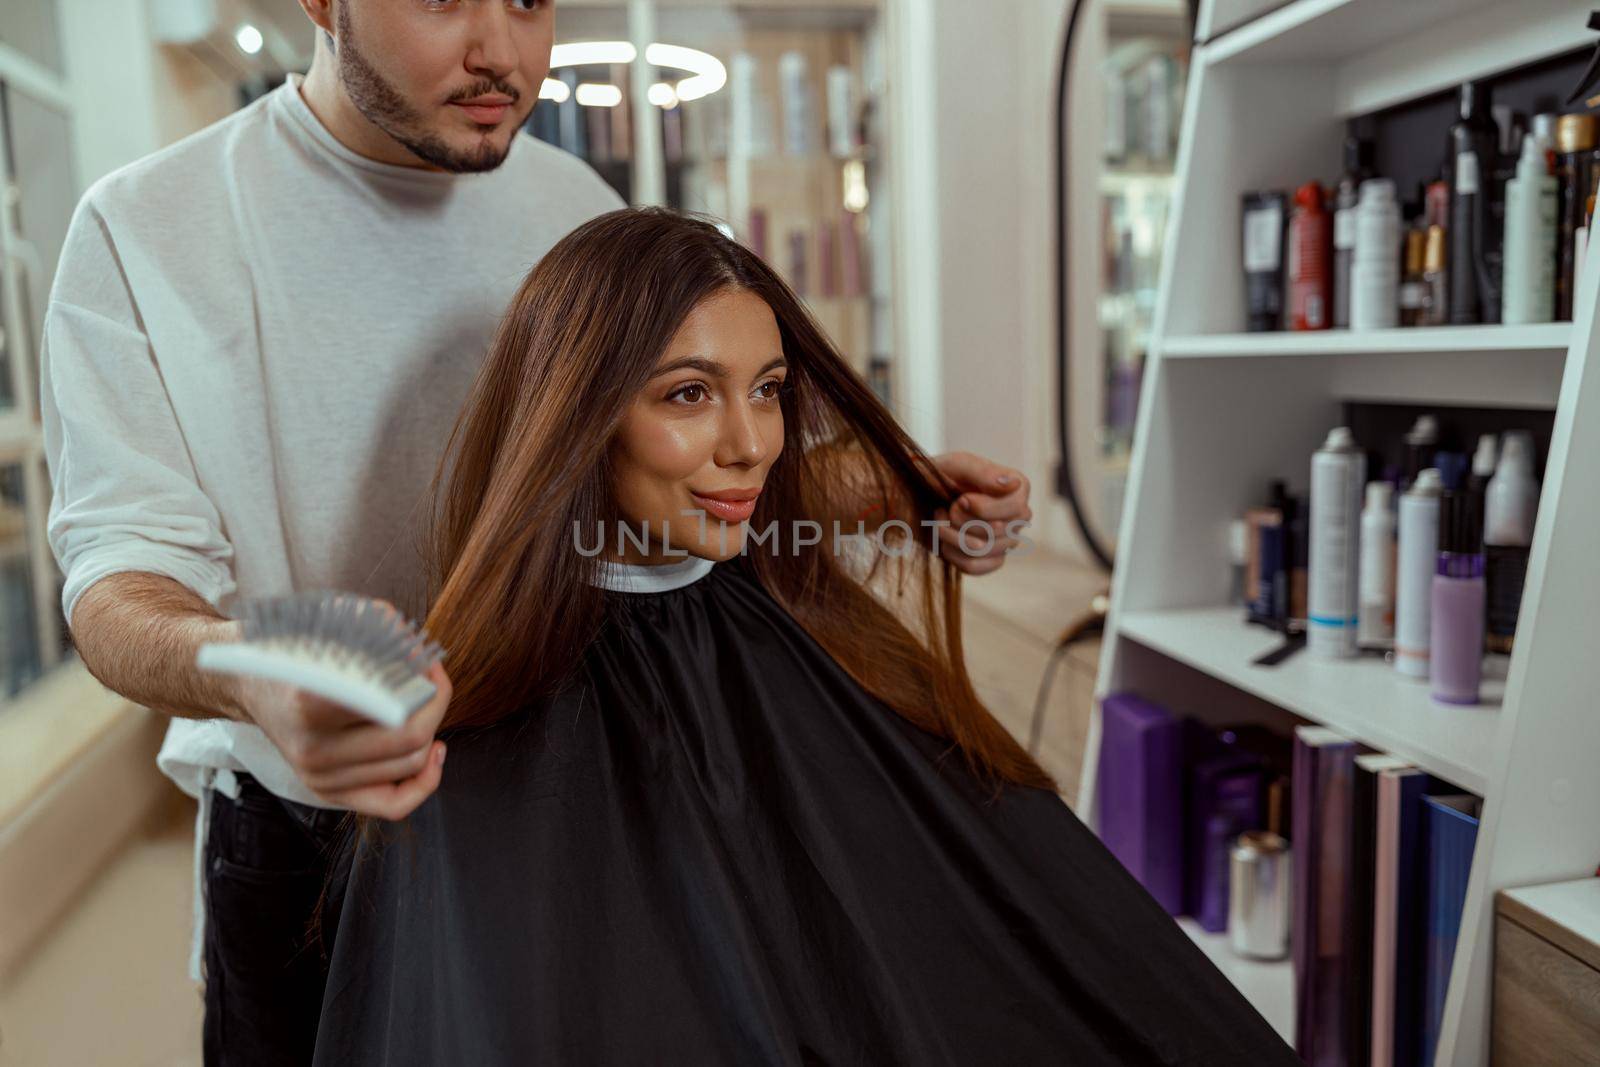 Woman looking at herself in mirror, pleased with a hairstyle at beauty salon. Haircut, hair care